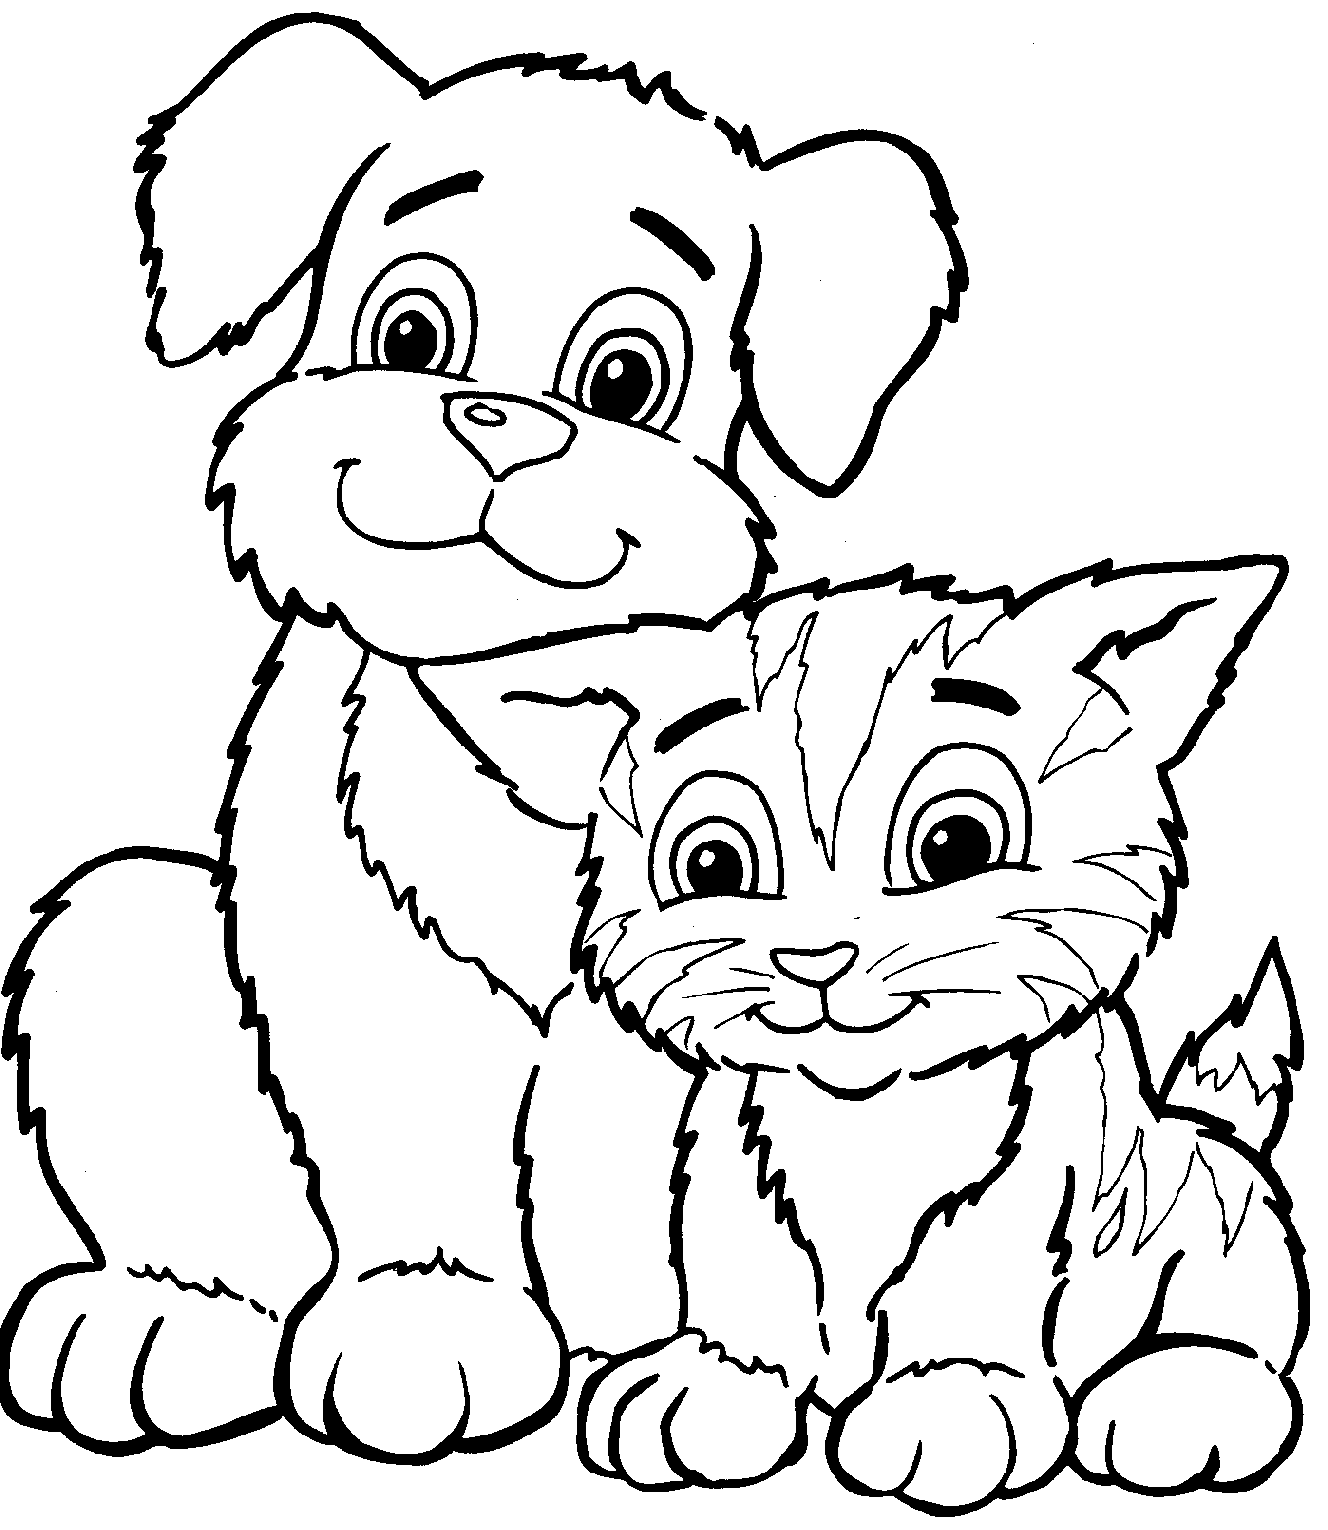 Dog and Cat Kids Coloring Sheets